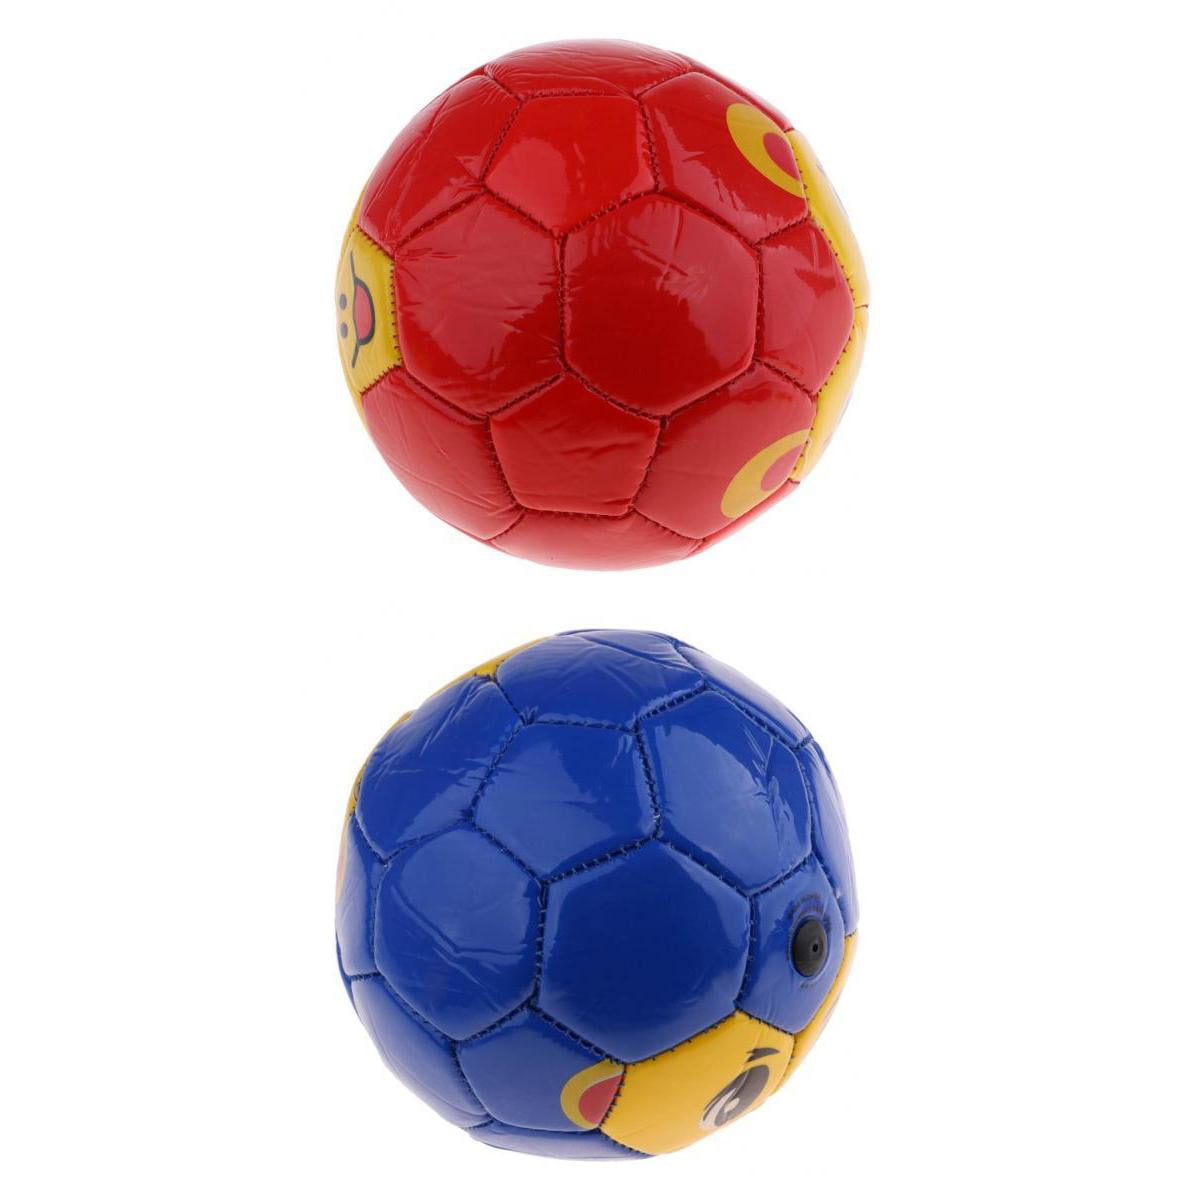 Cute Toy Gift Training Ball for Toddlers Kids Soft 5.5in Soccer Ball Beginner 